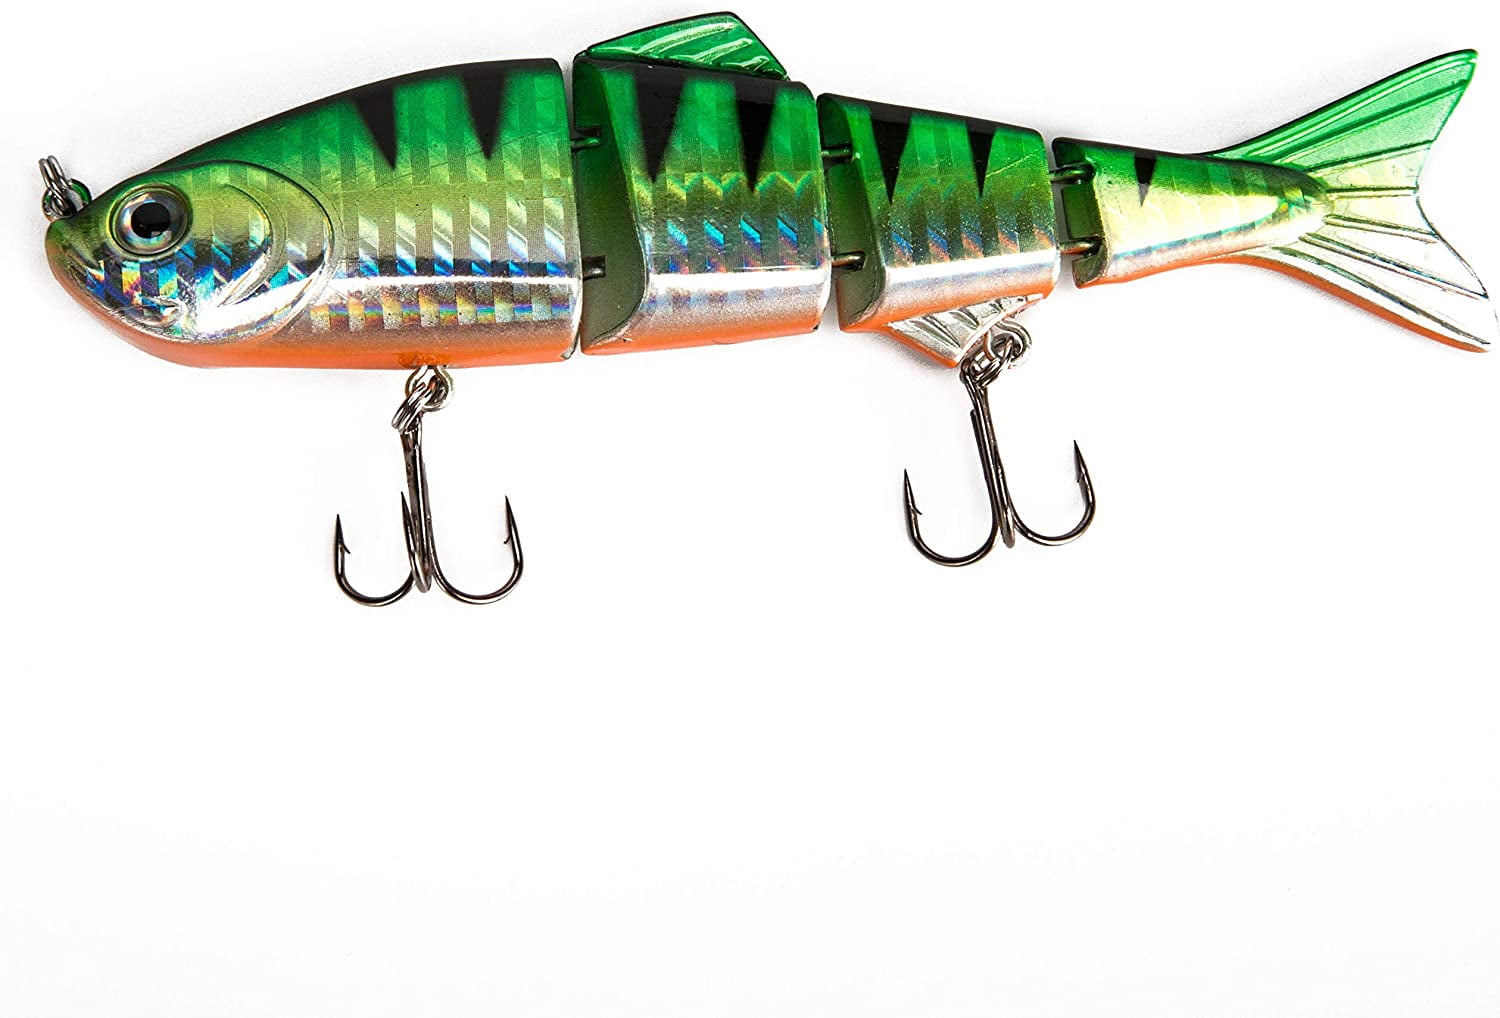 Thomify Hard Multi-Jointed Fishing Lure Swimbait Topwater Crankbait for  Bass Trout Musky Pike 